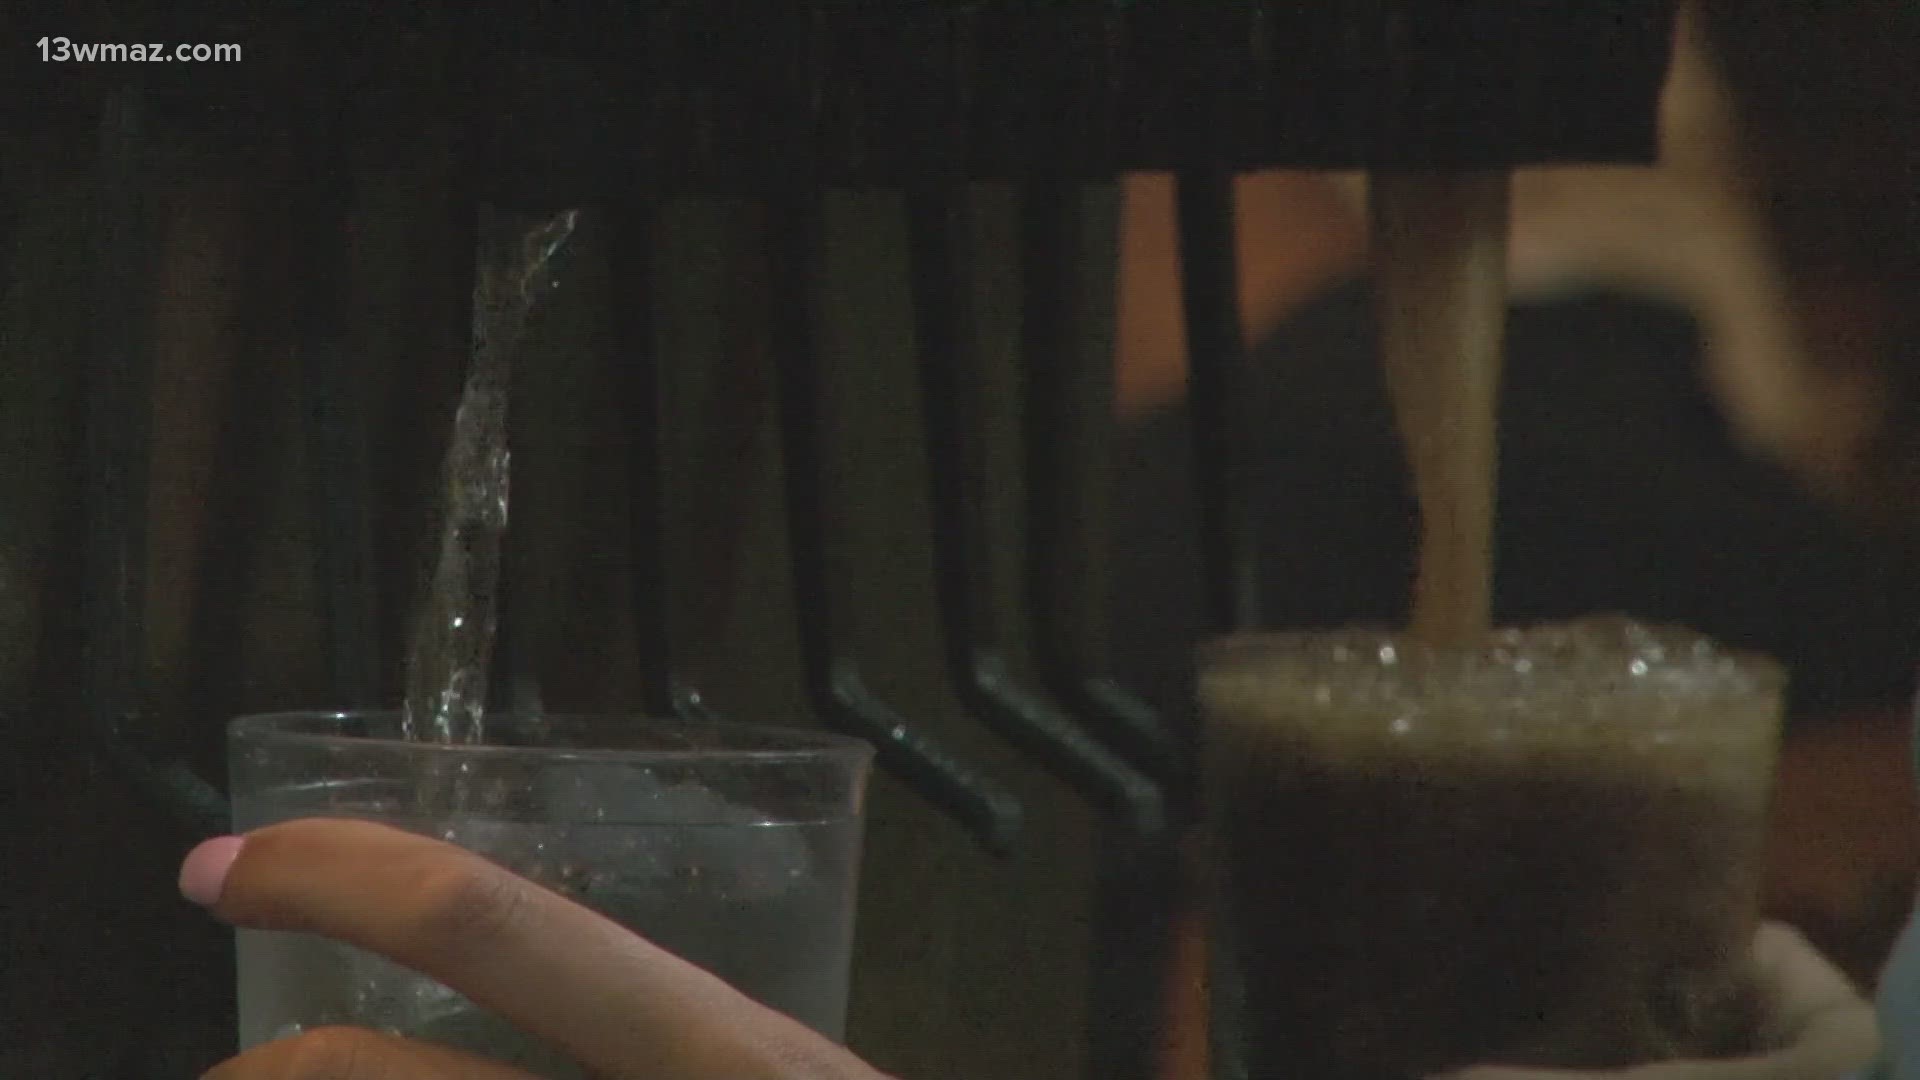 Milledgeville's continuing water issues have caused over 100 food service places to shut their doors at some point.